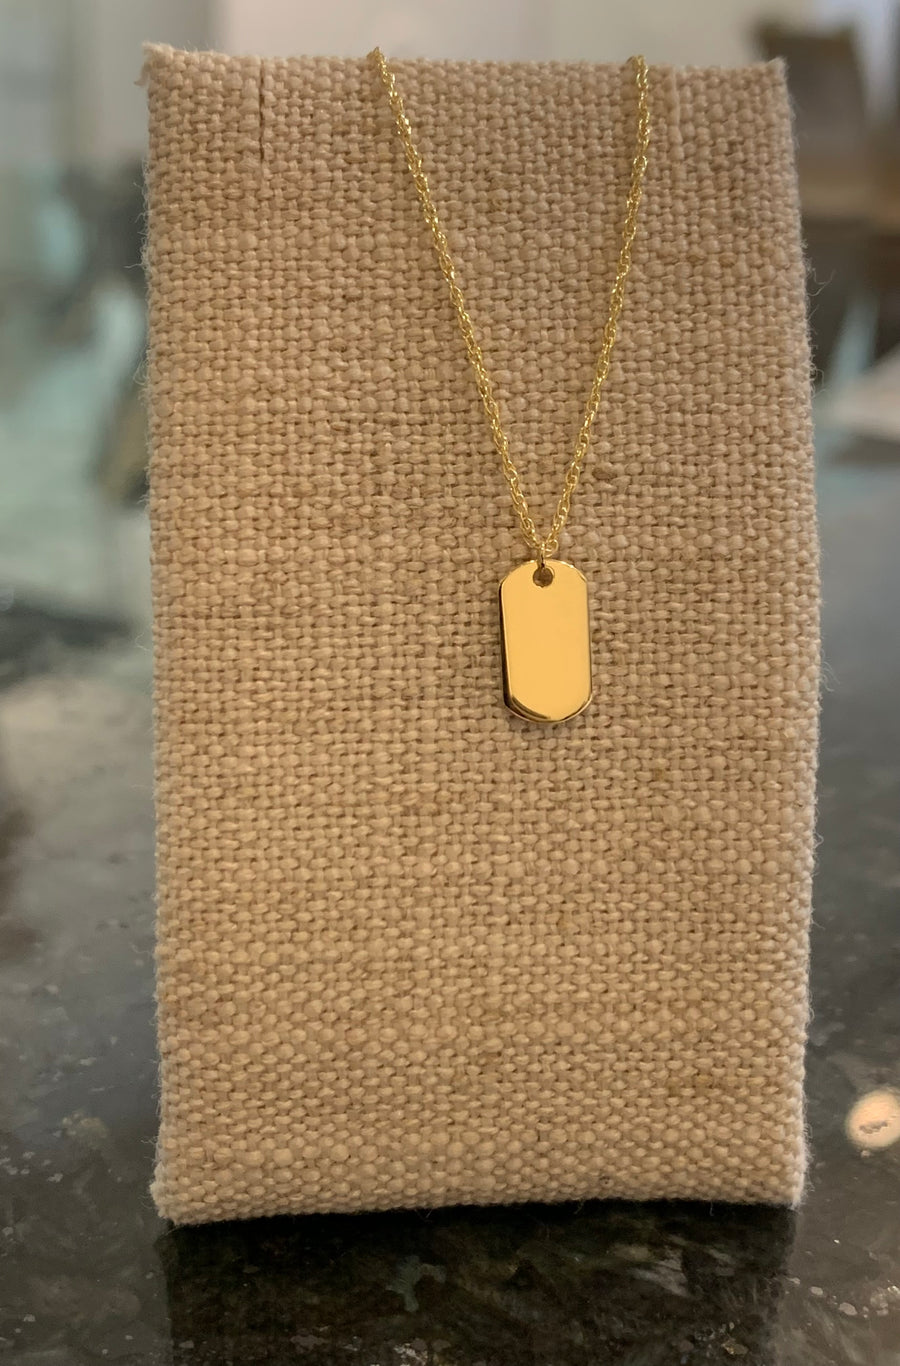 Mini Dog Tag Necklace in 14K Yellow Gold, 16-18" Adjustable Length! Engraveable!